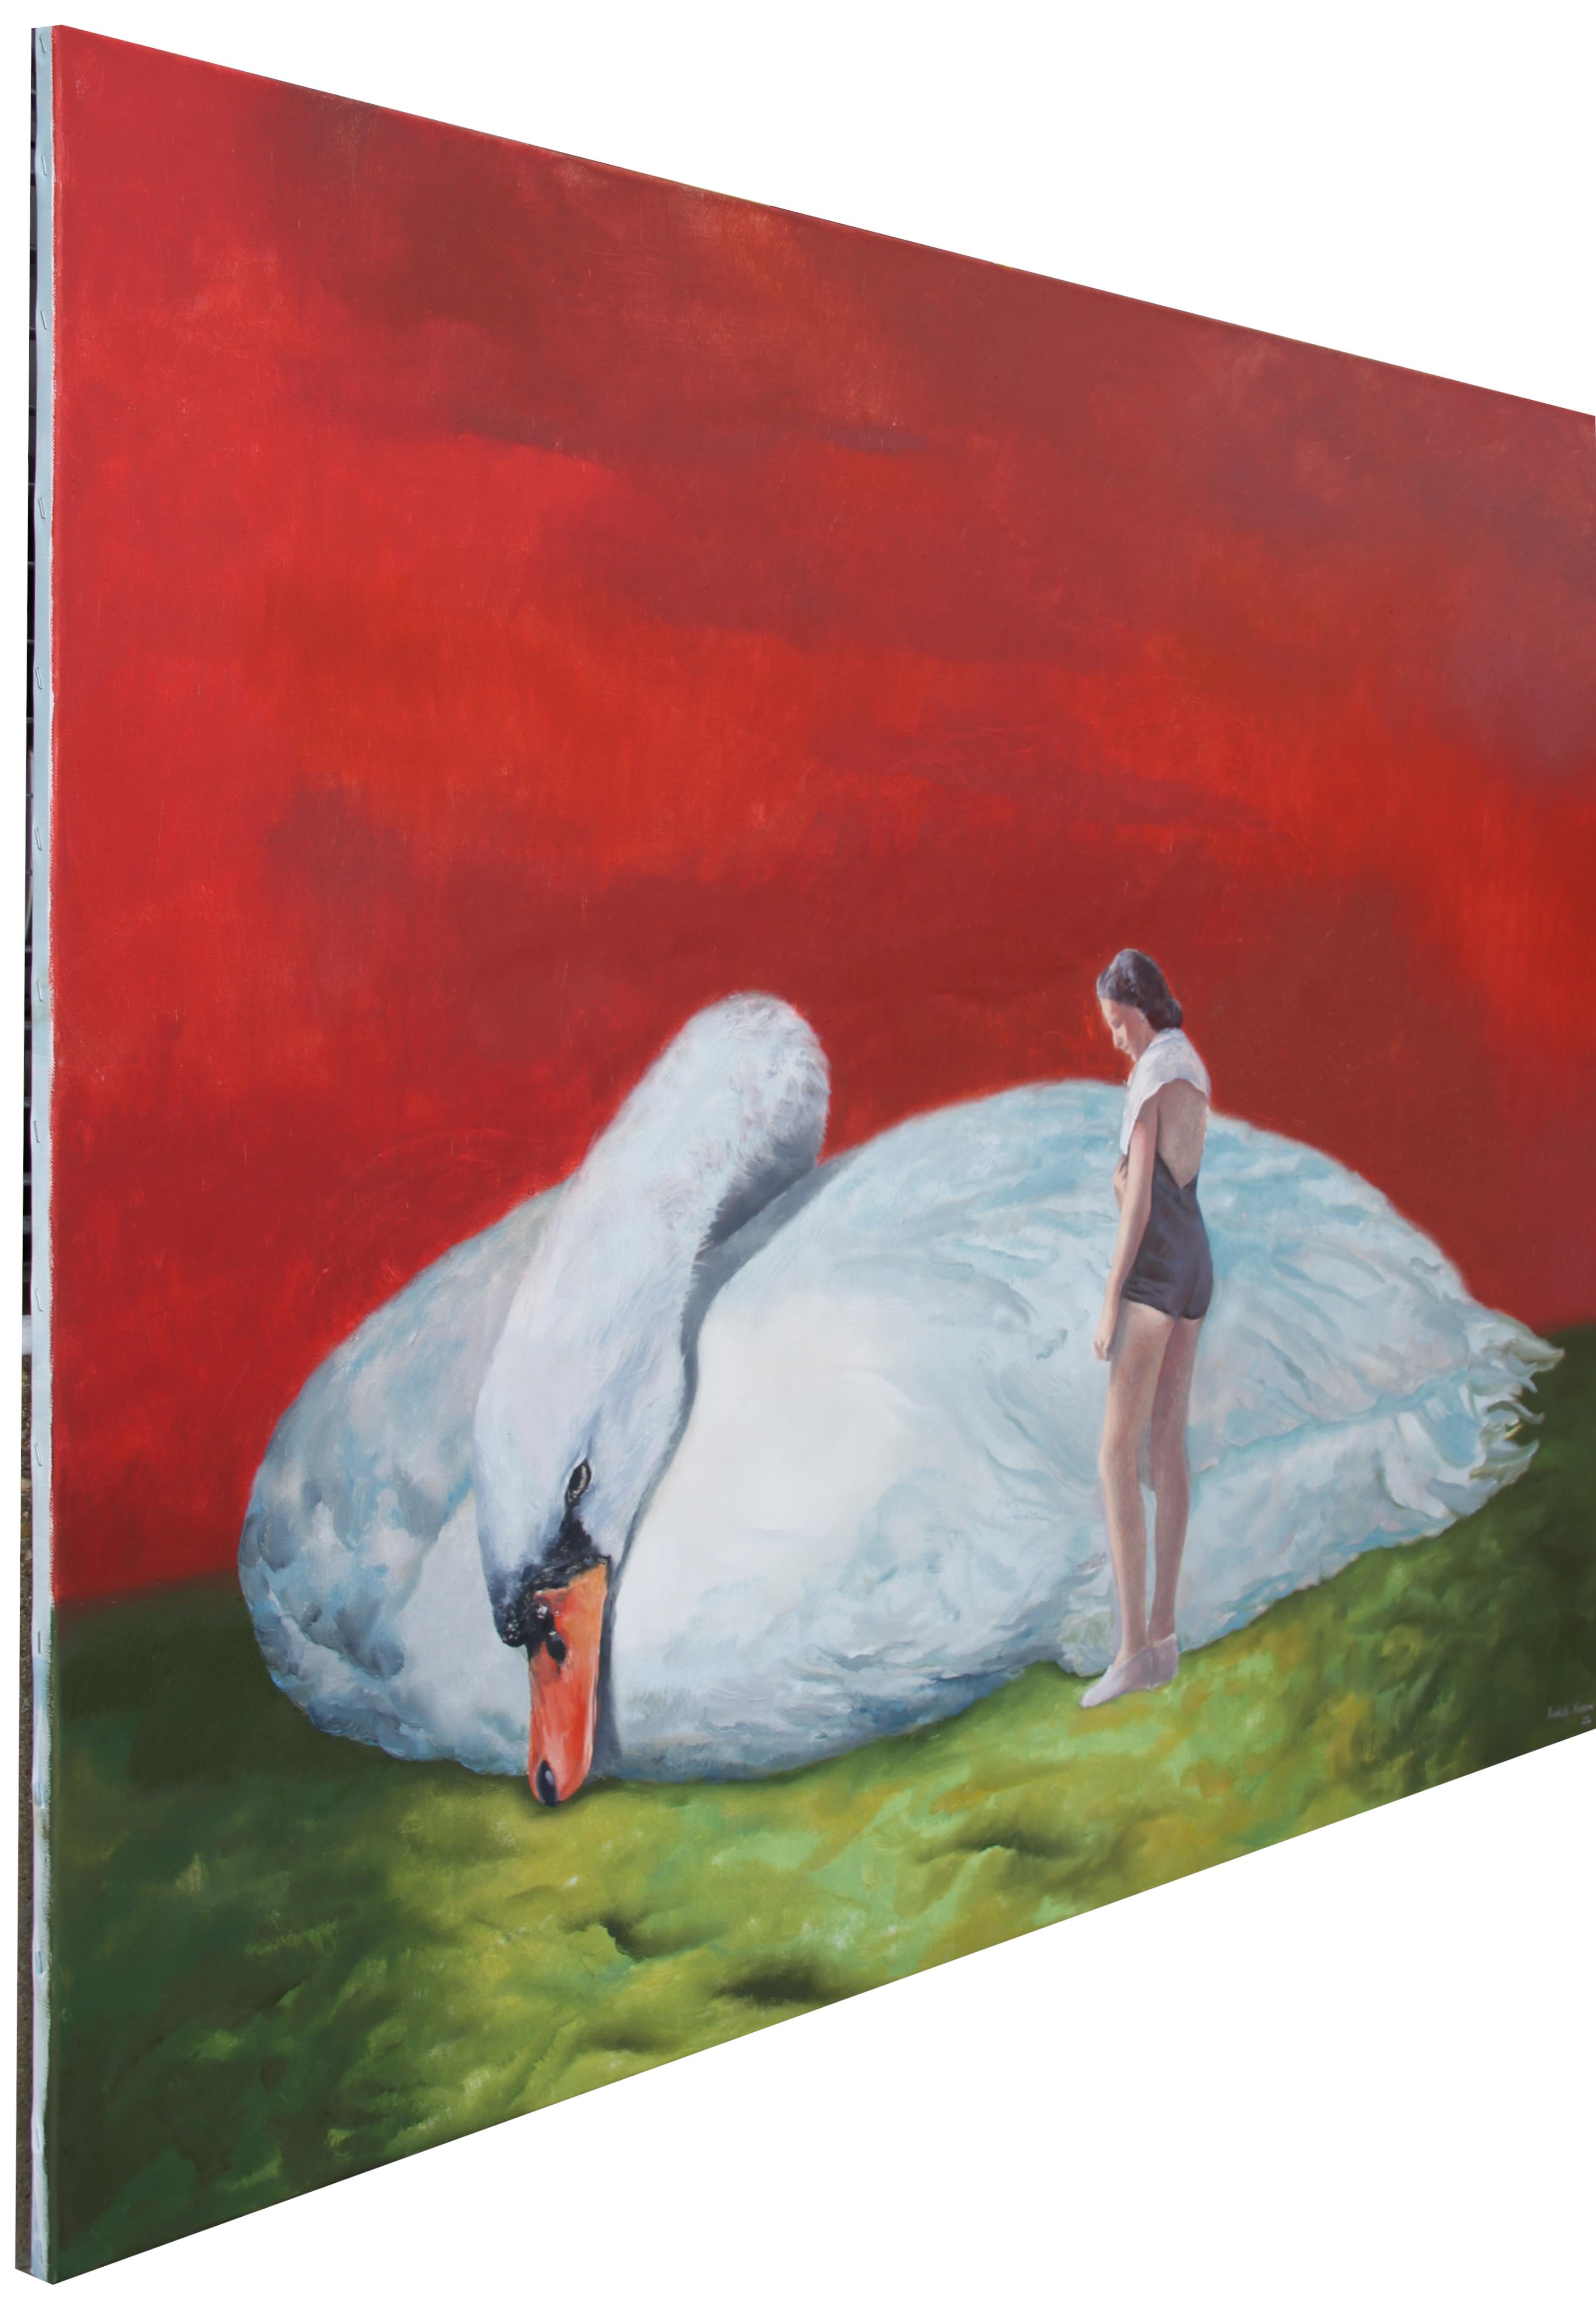 Soulmate is a superbe original painting on canvas depicting a woman bather next to a giant white Swan on a green lawn against an intense red sky.

keywords; white Swan, woman bather, red, green, americana, surrealism, vintage, oil painting,